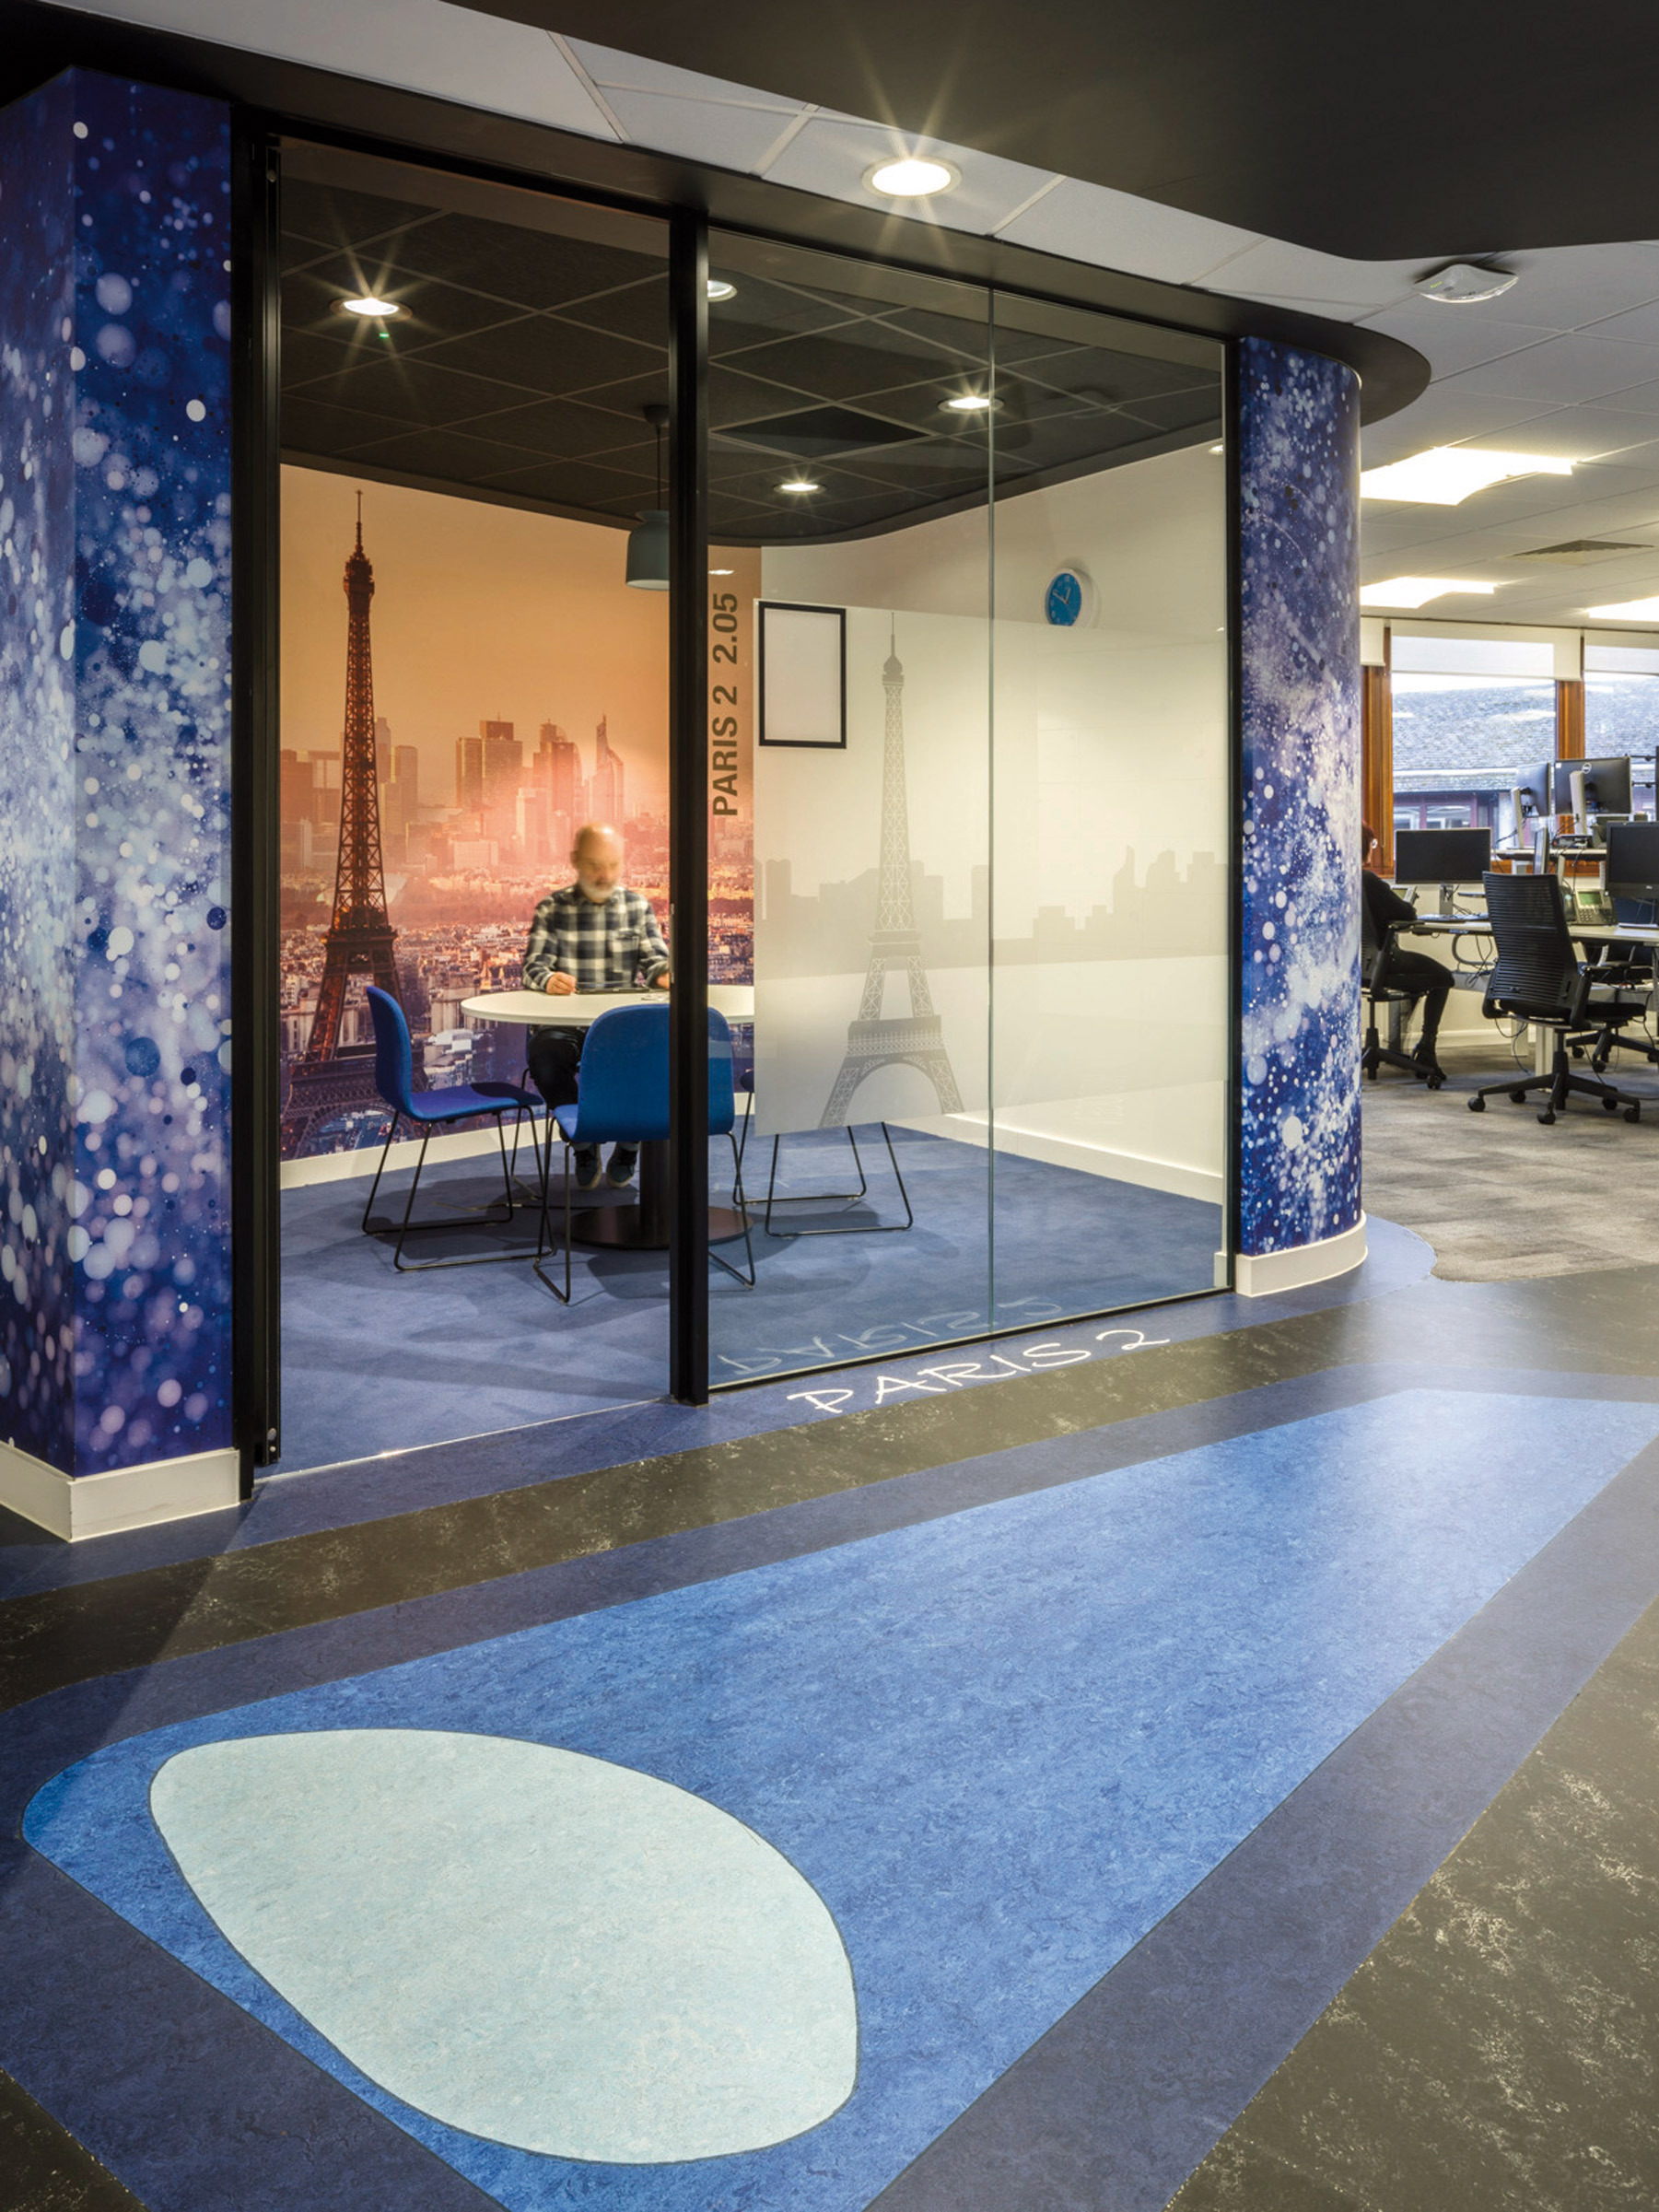 A modern office space featuring floor-to-ceiling glass partitions with an overlaid Paris scene, accented by cosmic and cityscape graphics. The design incorporates a deep blue carpet with a circular pattern, complementing the room's Parisian theme and offering a vibrant, creative work environment.